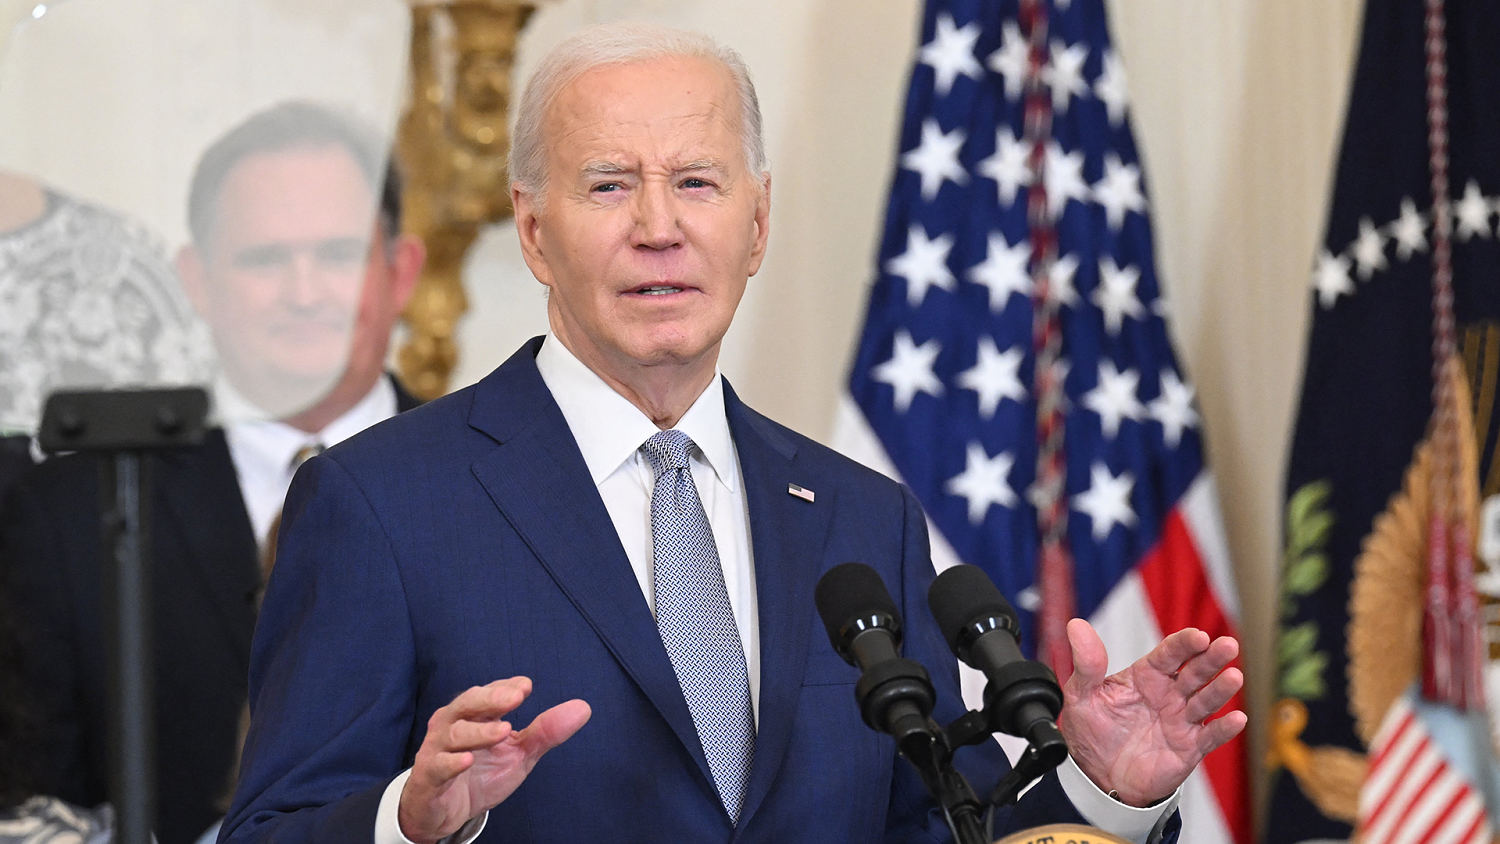 Biden delivers remarks on investing and the job market